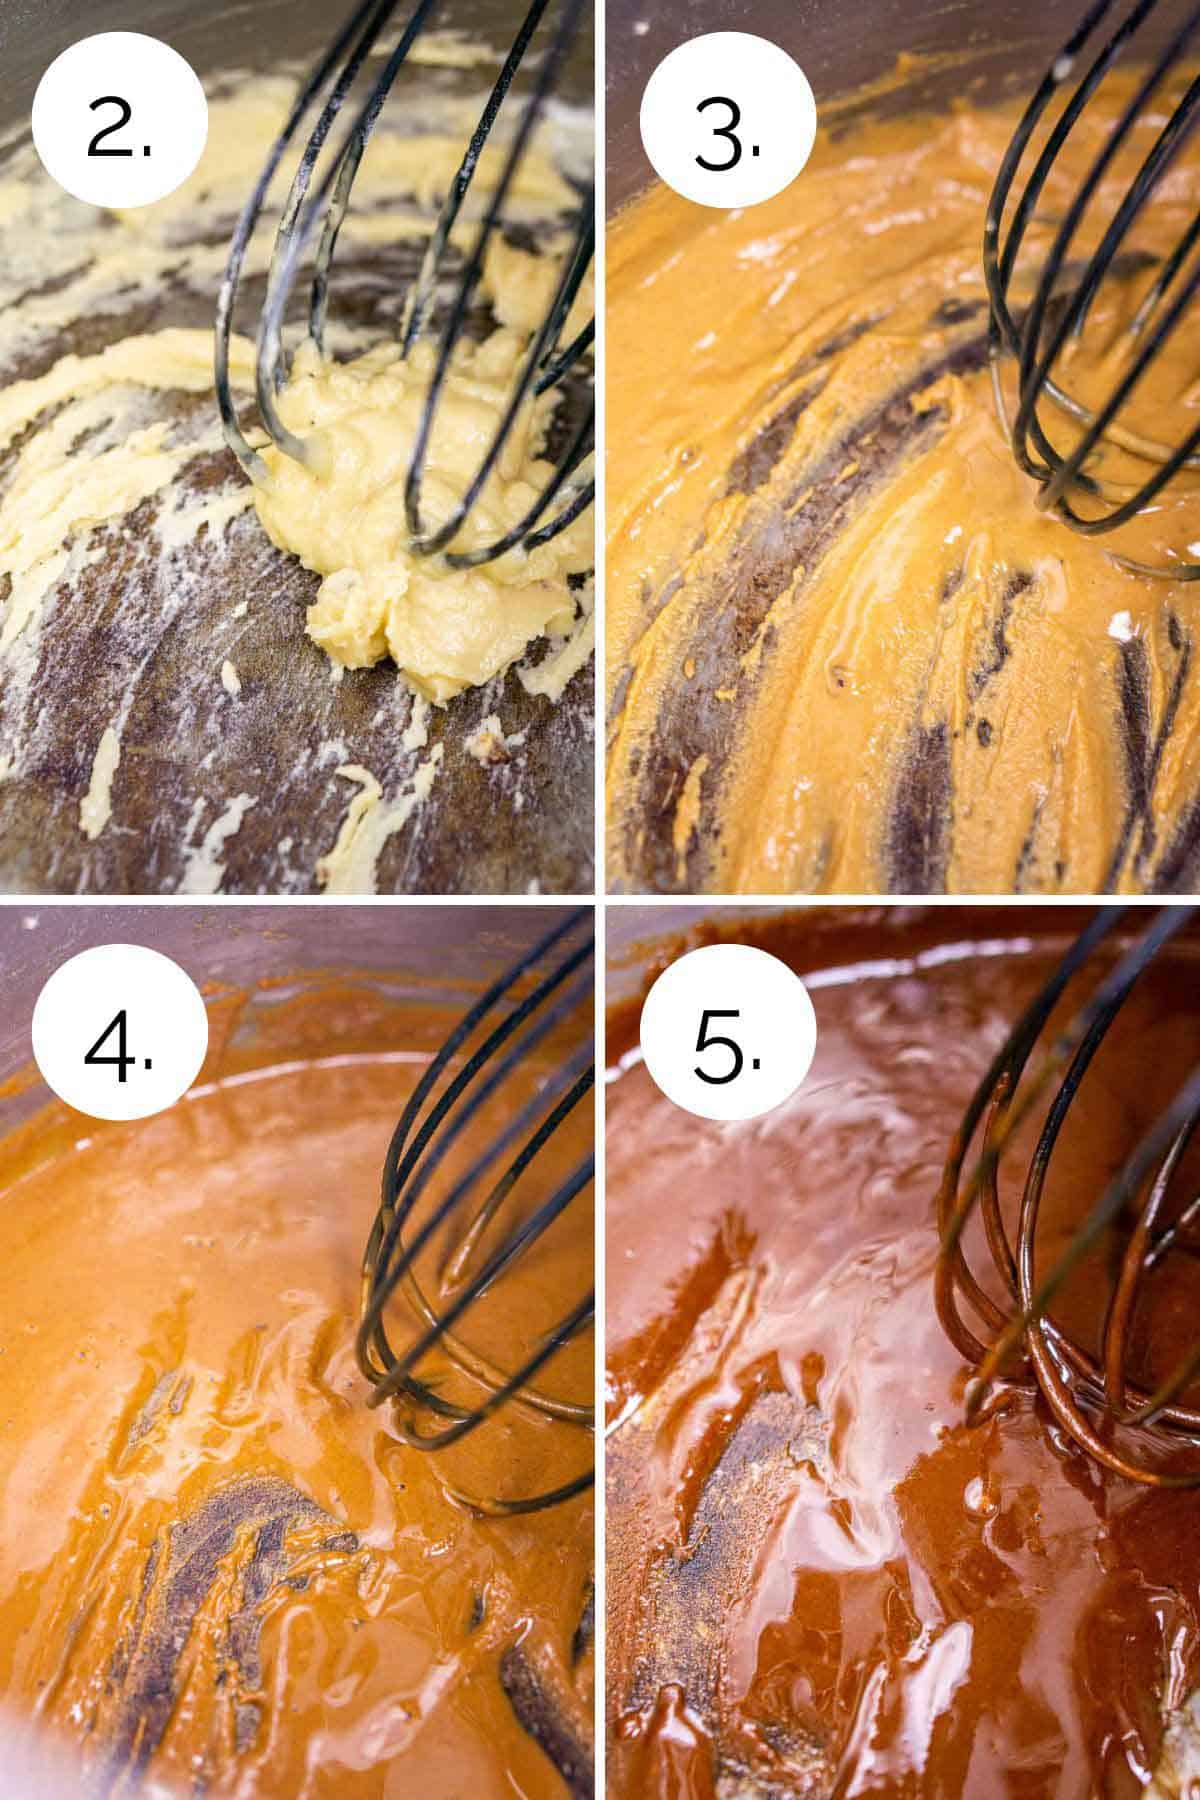 A four-photo collage showing the process of cooking the gumbo roux from a pale blond to a dark chocolate color in a large stainless steel stock pot.